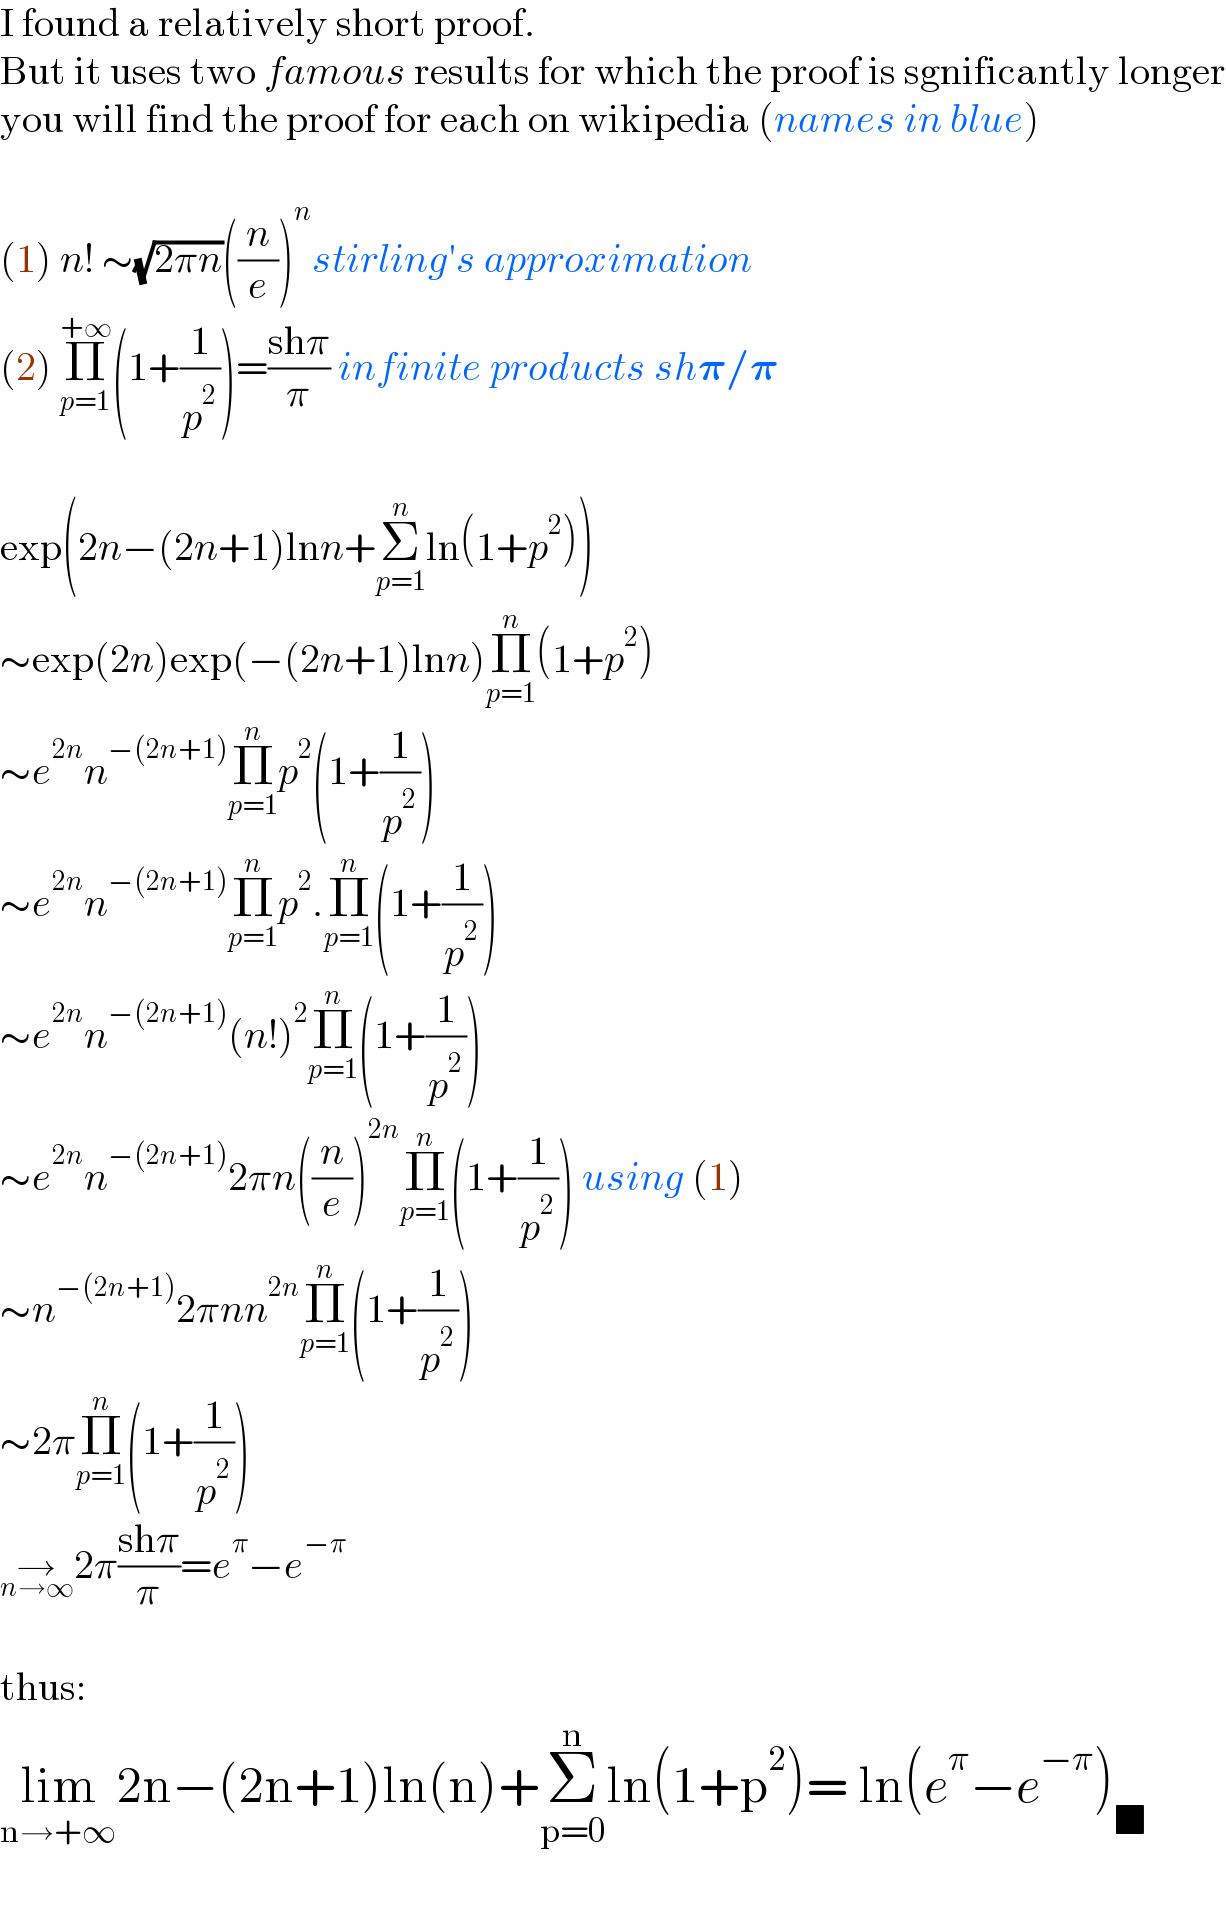 I found a relatively short proof.  But it uses two famous results for which the proof is sgnificantly longer  you will find the proof for each on wikipedia (names in blue)    (1) n! ∼(√(2πn))((n/e))^n stirling′s approximation  (2) Π_(p=1) ^(+∞) (1+(1/p^2 ))=((shπ)/π) infinite products sh𝛑/𝛑    exp(2n−(2n+1)lnn+Σ_(p=1) ^n ln(1+p^2 ))  ∼exp(2n)exp(−(2n+1)lnn)Π_(p=1) ^n (1+p^2 )  ∼e^(2n) n^(−(2n+1)) Π_(p=1) ^n p^2 (1+(1/p^2 ))  ∼e^(2n) n^(−(2n+1)) Π_(p=1) ^n p^2 .Π_(p=1) ^n (1+(1/p^2 ))  ∼e^(2n) n^(−(2n+1)) (n!)^2 Π_(p=1) ^n (1+(1/p^2 ))  ∼e^(2n) n^(−(2n+1)) 2πn((n/e))^(2n) Π_(p=1) ^n (1+(1/p^2 )) using (1)  ∼n^(−(2n+1)) 2πnn^(2n) Π_(p=1) ^n (1+(1/p^2 ))   ∼2πΠ_(p=1) ^n (1+(1/p^2 ))   →_(n→∞) 2π((shπ)/π)=e^π −e^(−π)     thus:  lim_(n→+∞) 2n−(2n+1)ln(n)+Σ_(p=0) ^n ln(1+p^2 )= ln(e^π −e^(−π) )_■     